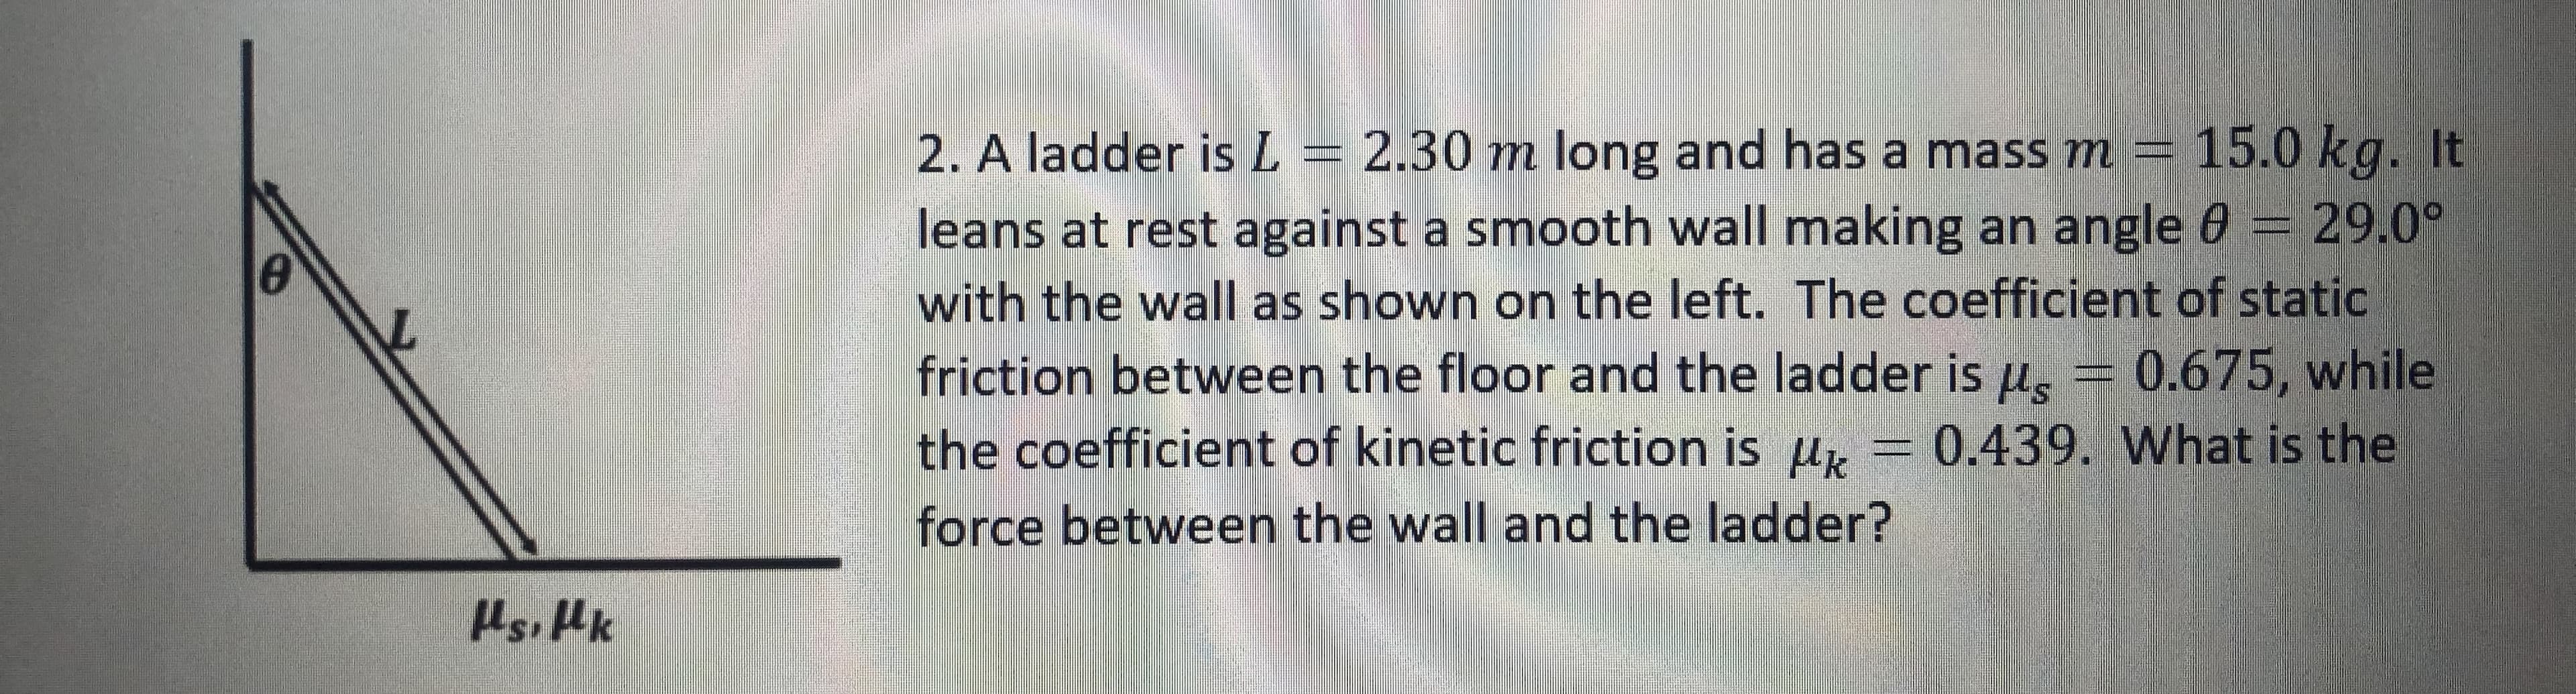 2.30 m long and has a mass m = 15.0 kg. It
leans at rest against a smooth wall making an angle 0 = 29.0°
with the wall as shown on the left. The coefficient of static
friction between the floor and the ladder is u, = 0.675, while
the coefficient of kinetic friction is u, = 0.439. What is the
2. A ladder is L
force between the wall and the ladder?
Hsi Hk
